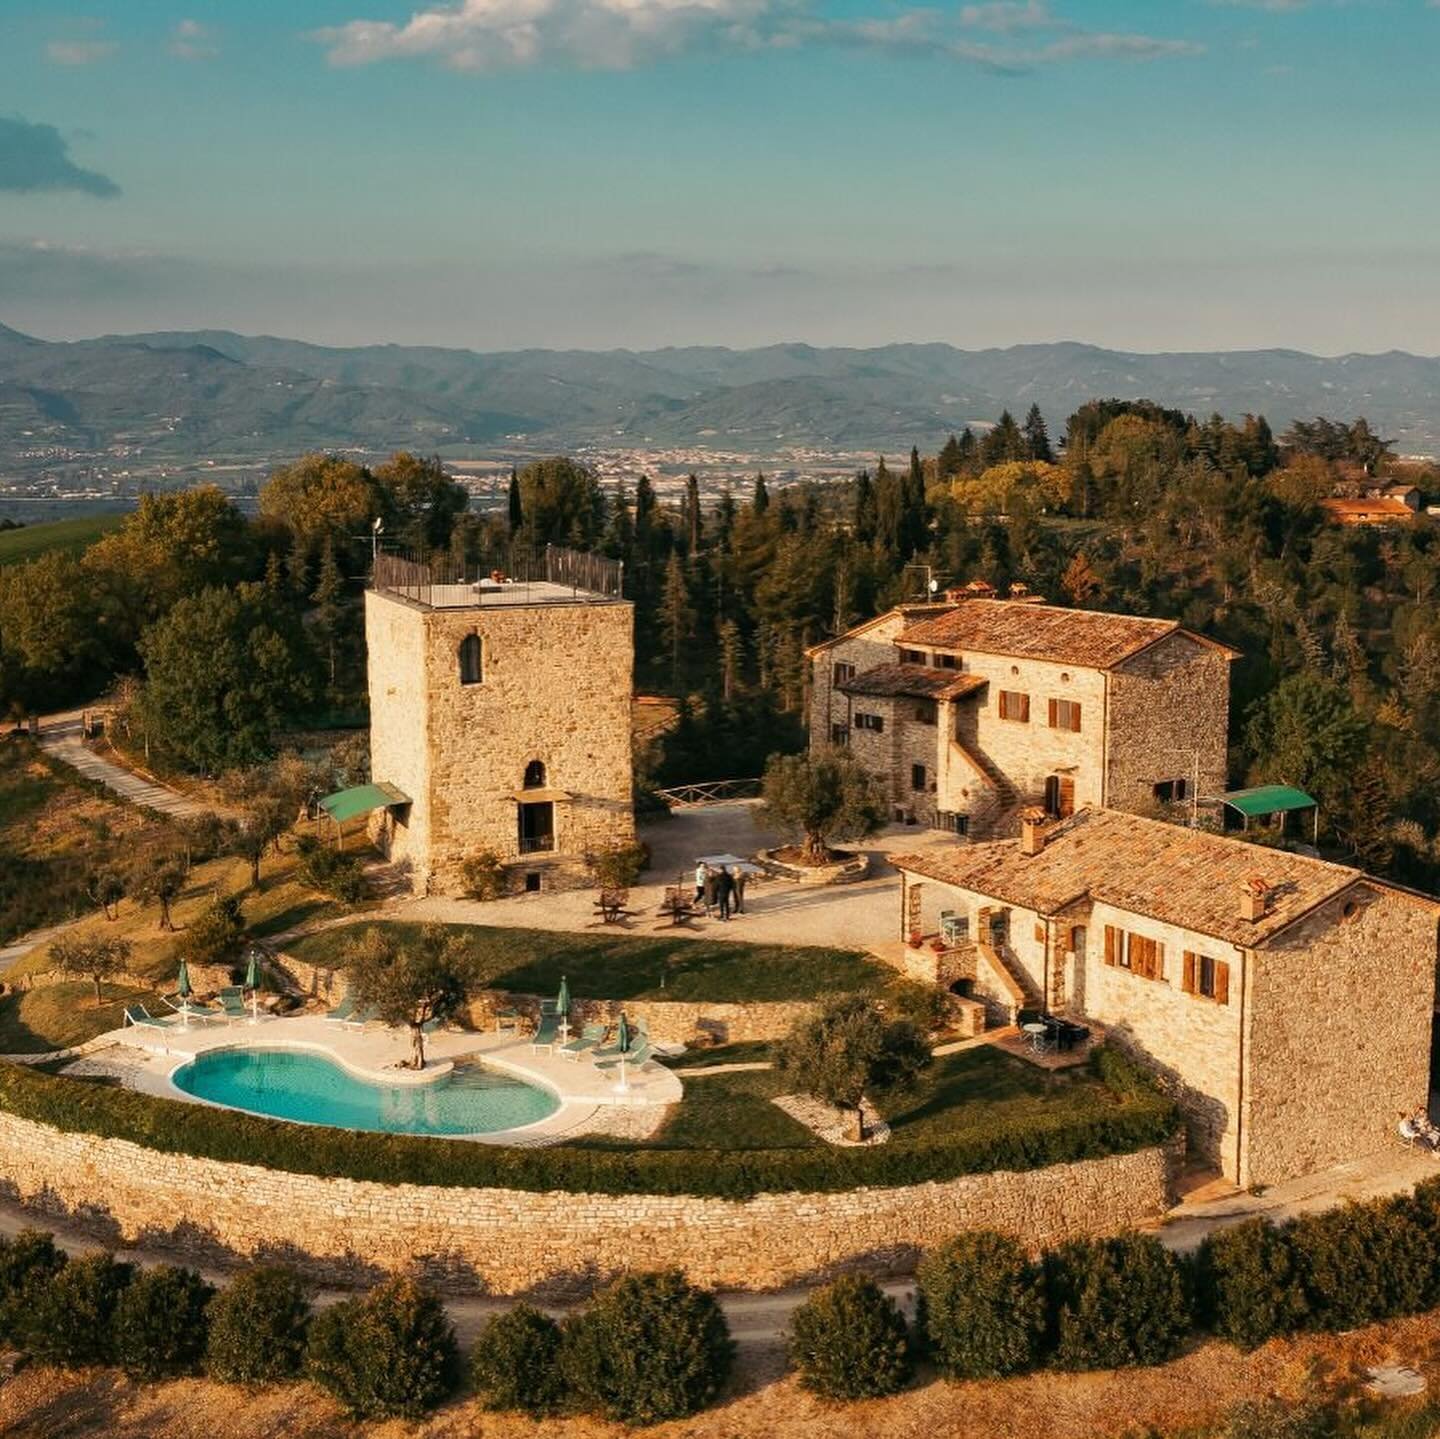 YogicEscape Tuscany Retreat 🌞

This fall, escape to the heart of Tuscany with @yogicescape for a rejuvenating yoga retreat while staying at a dreamy traditional Italian farmhouse with touches of modernity. 

What to expect: 

*daily yoga 
*meditativ